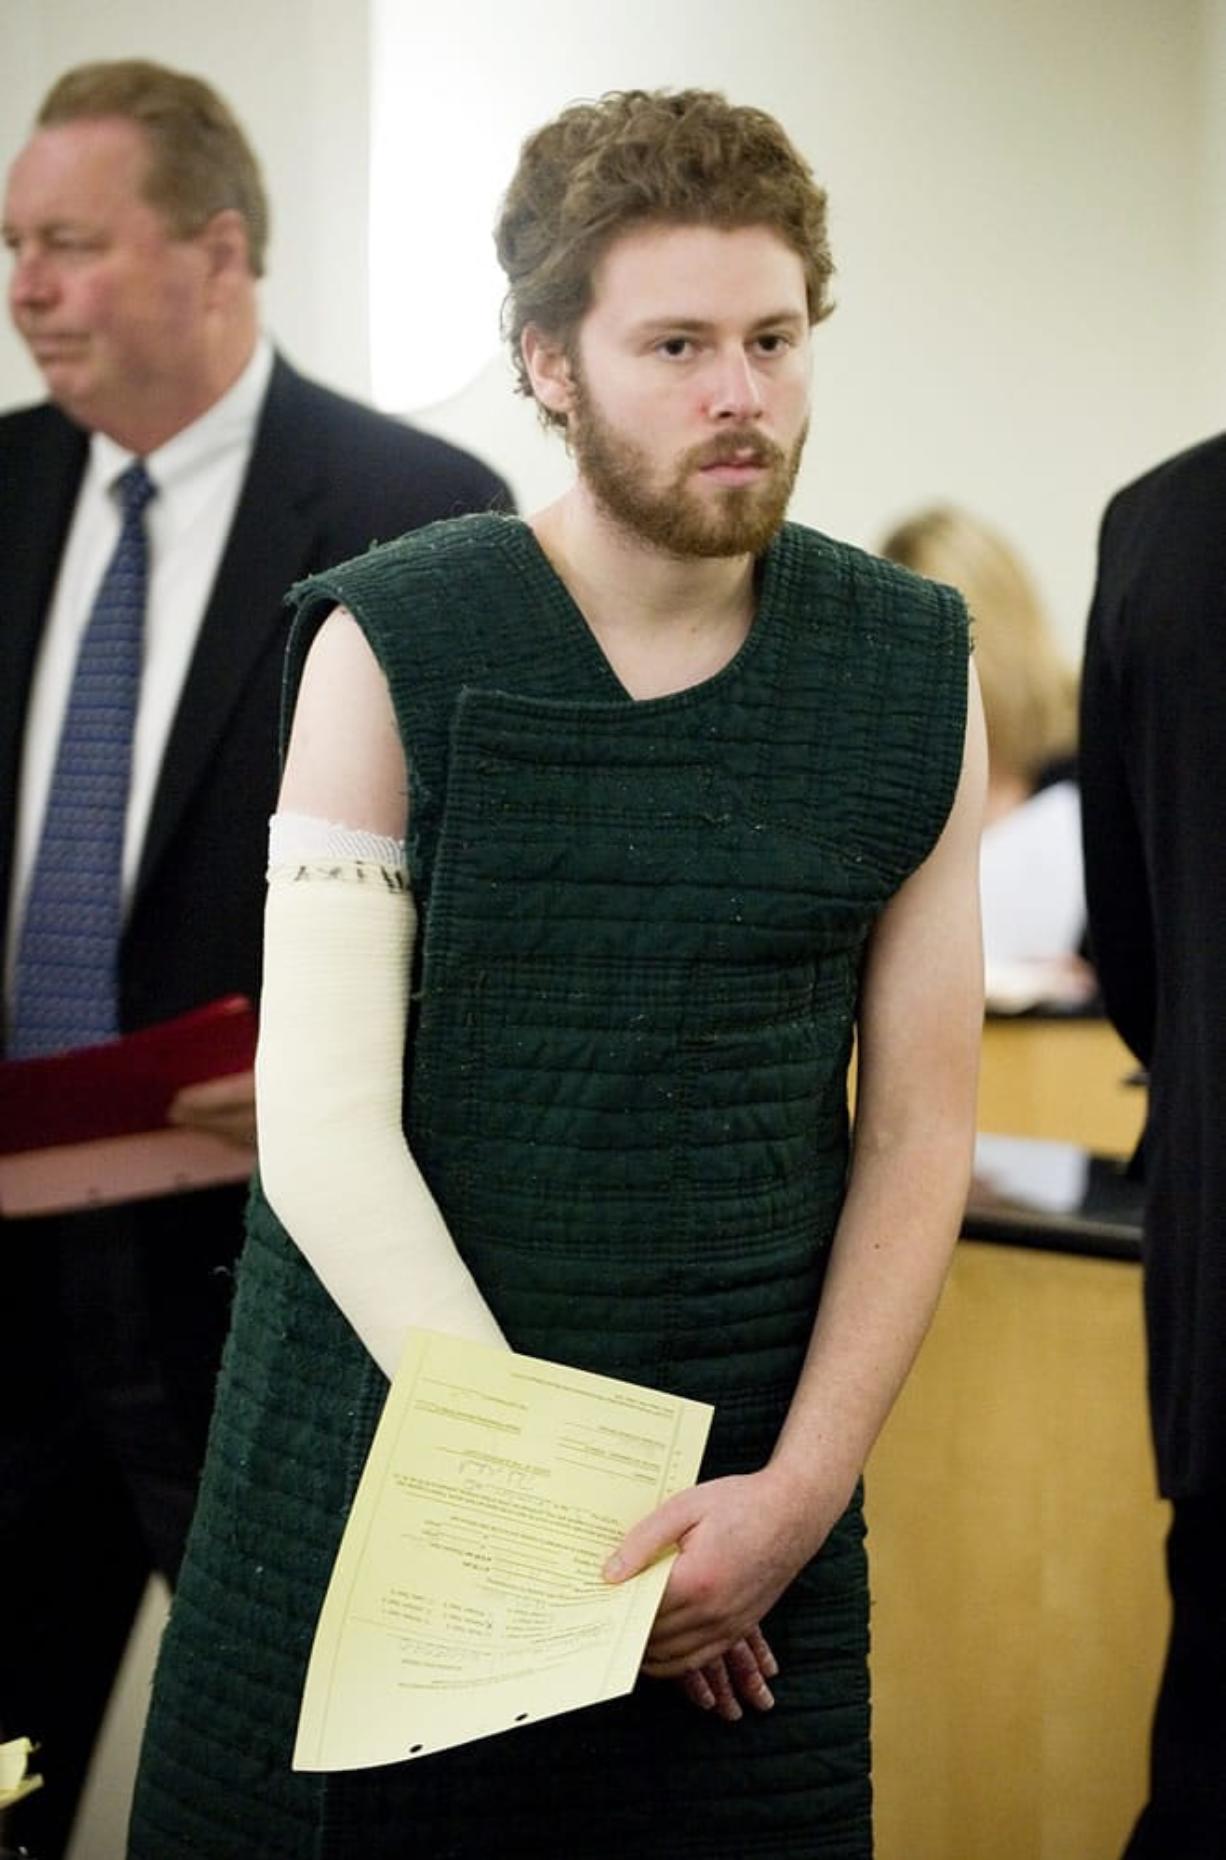 David Michael Miller, 24, pictured here at his arraignment in December 2010, was sentenced Thursday to about 17 years in prison for trying to kill his ex-girlfriend by burning her house down.